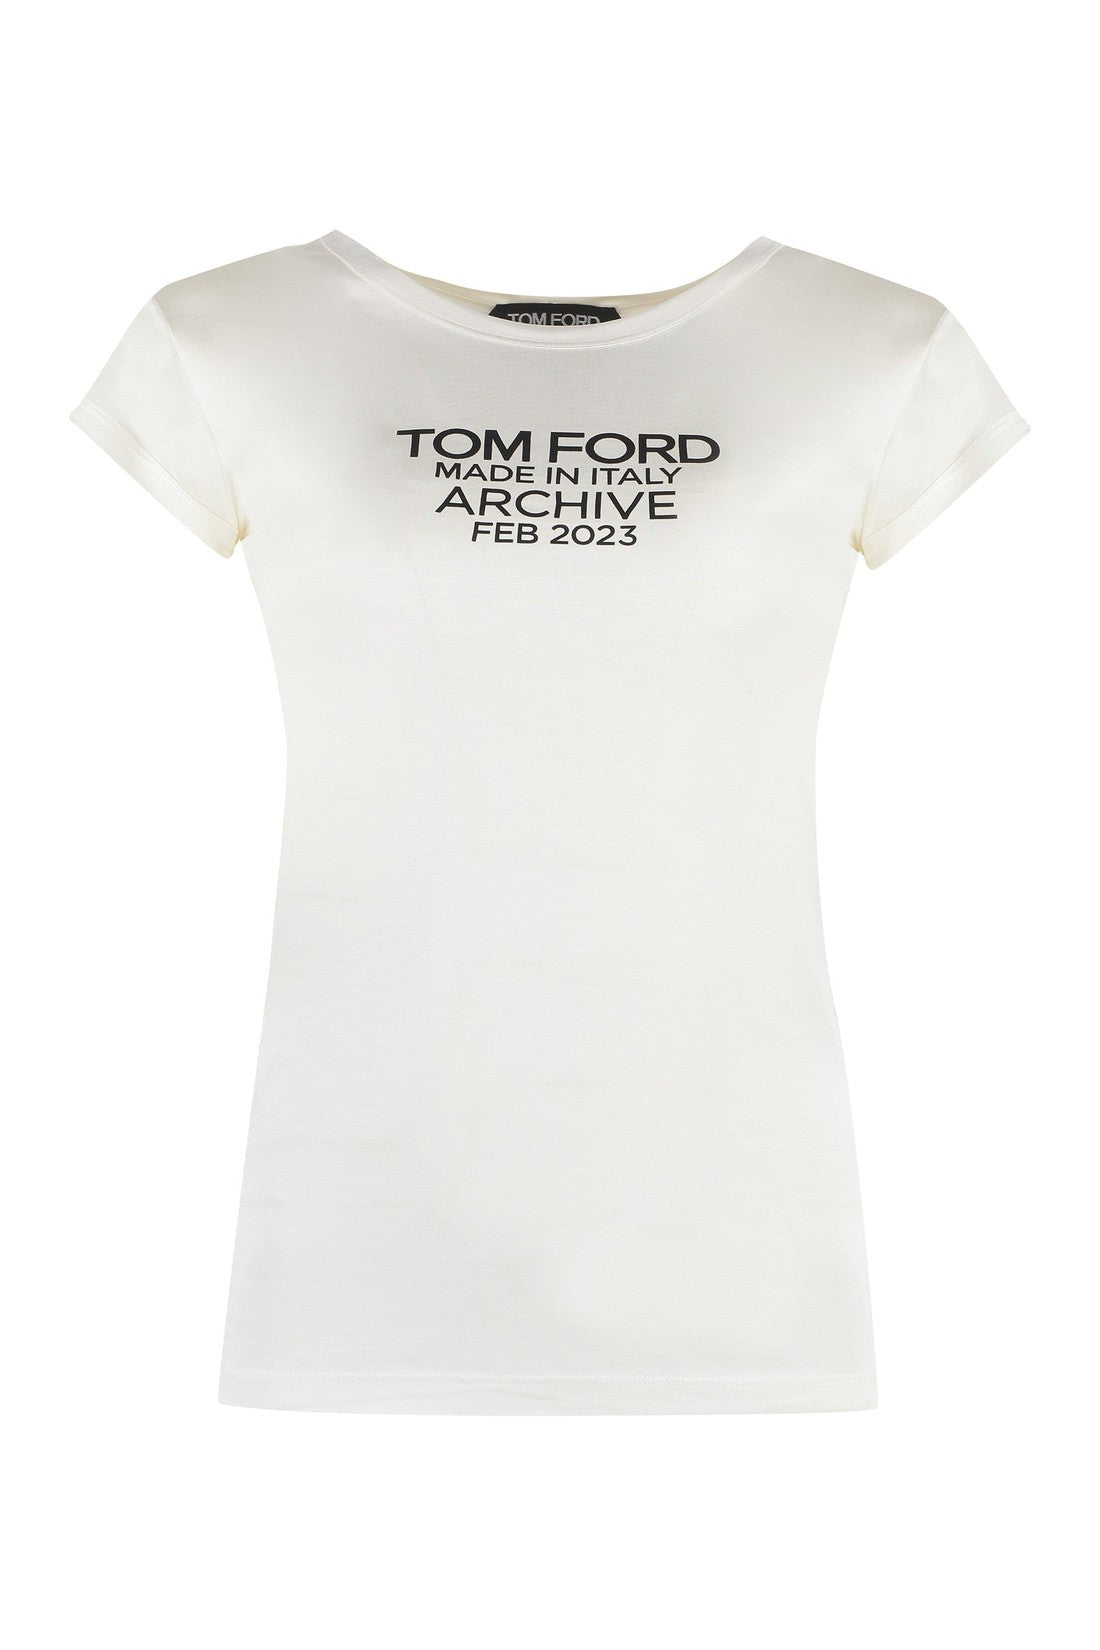 Tom Ford-OUTLET-SALE-Silk T-shirt-ARCHIVIST